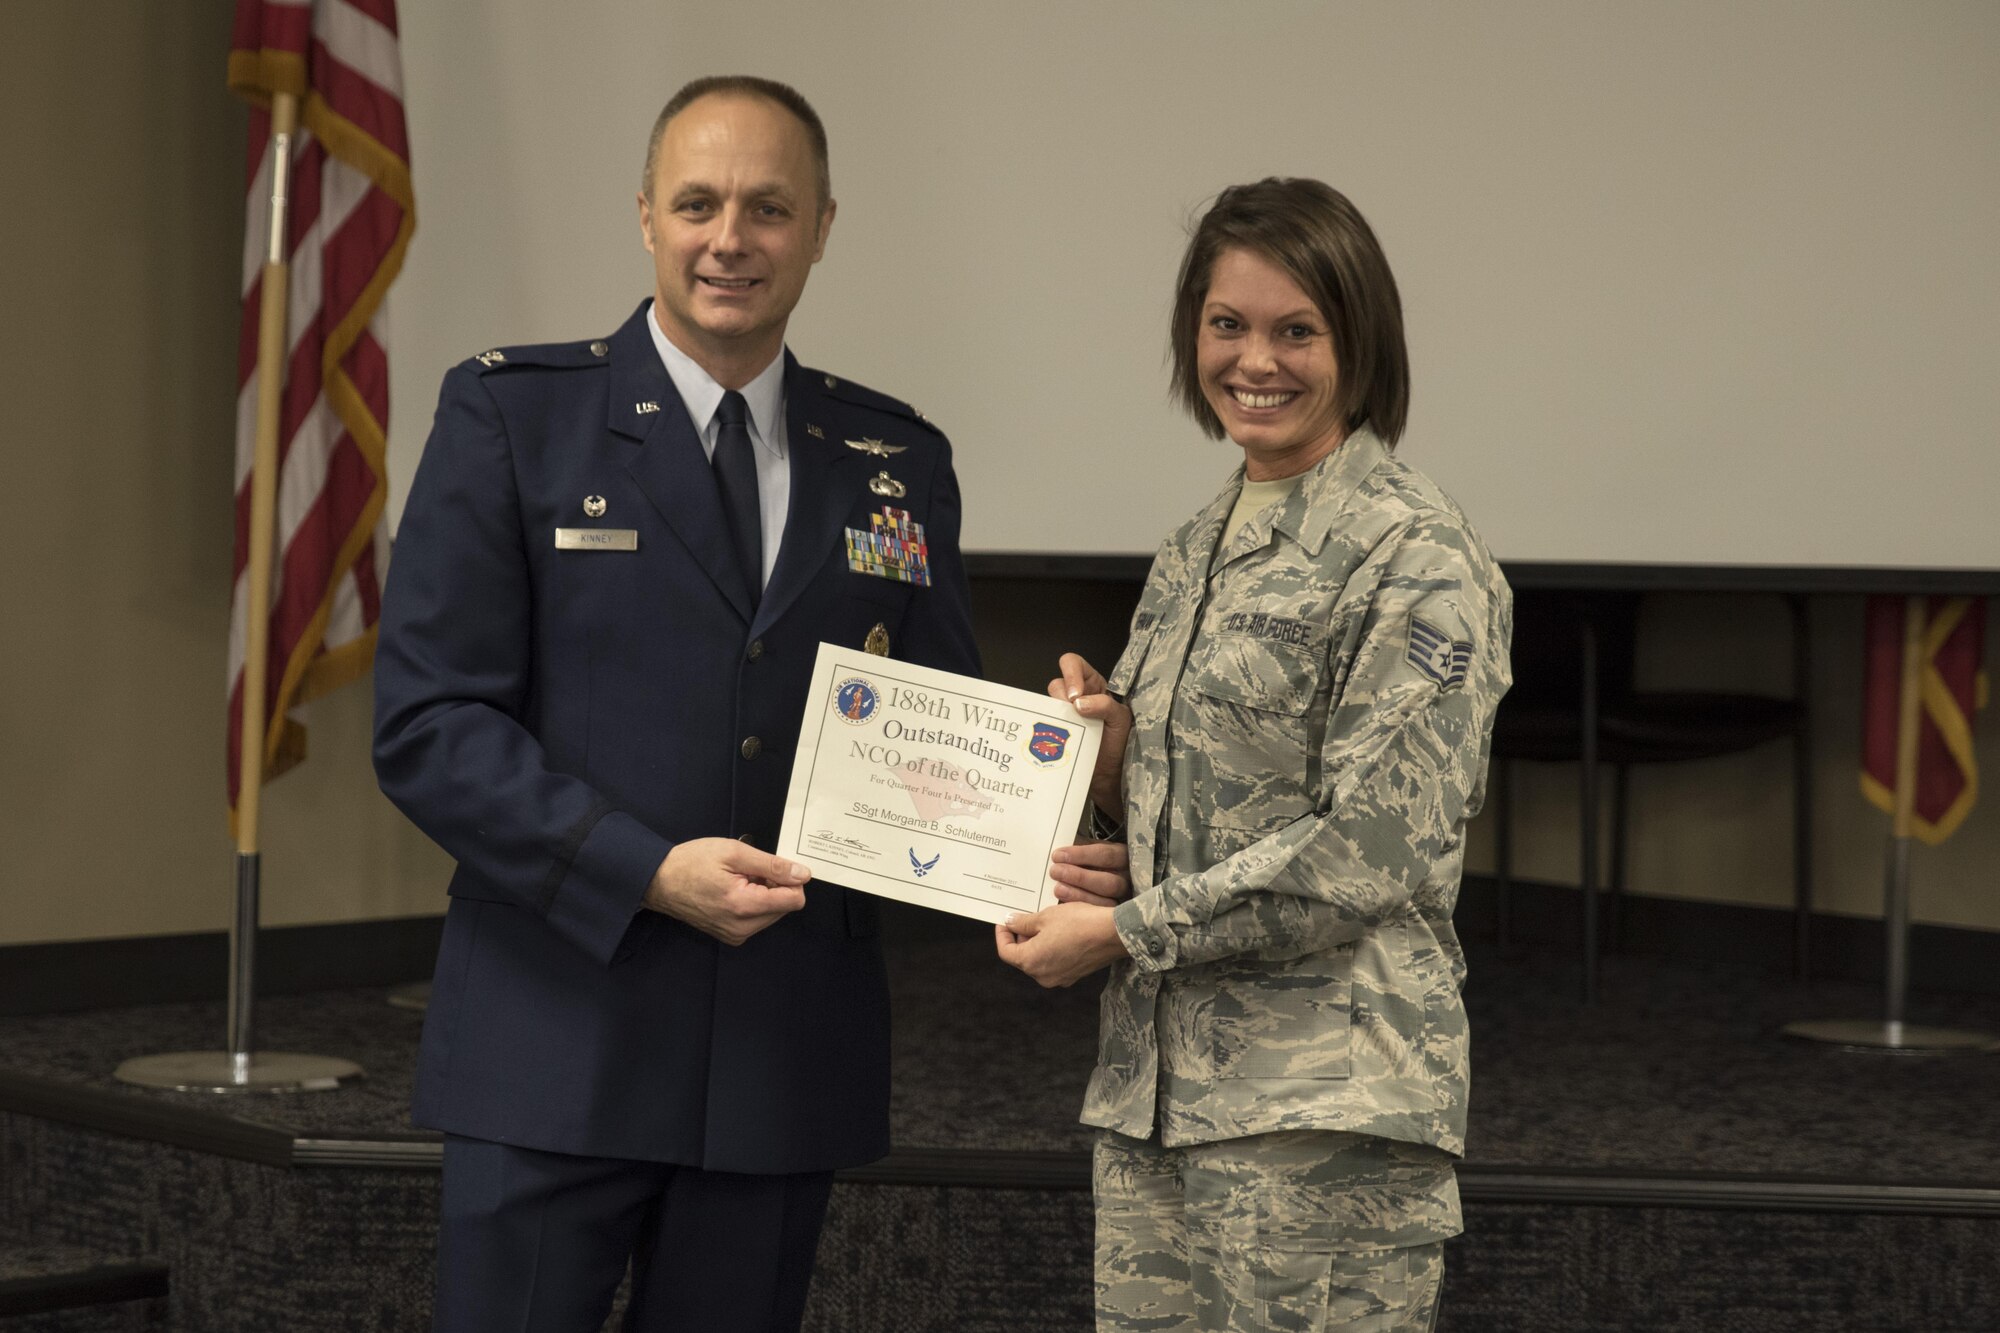 Staff Sgt. Morgana Schluterman, accepts the Noncommissioned officer of the Quarter award from Col. Robert Kinney, 188th Wing commander, Nov. 4, 2017, at Ebbing Air National Guard Base, Fort Smith, Ark. The award is given to airmen that have provided exceptional service to the wing throughout the last quarter and distinguished themselves among the best in the 188th. Winners were selected in the Airman, NCO, Senior NCO, First Sergeant, CGO and Field Grade Officer categories. (U.S. Air National Guard photo by Tech. Sgt. Daniel Condit)